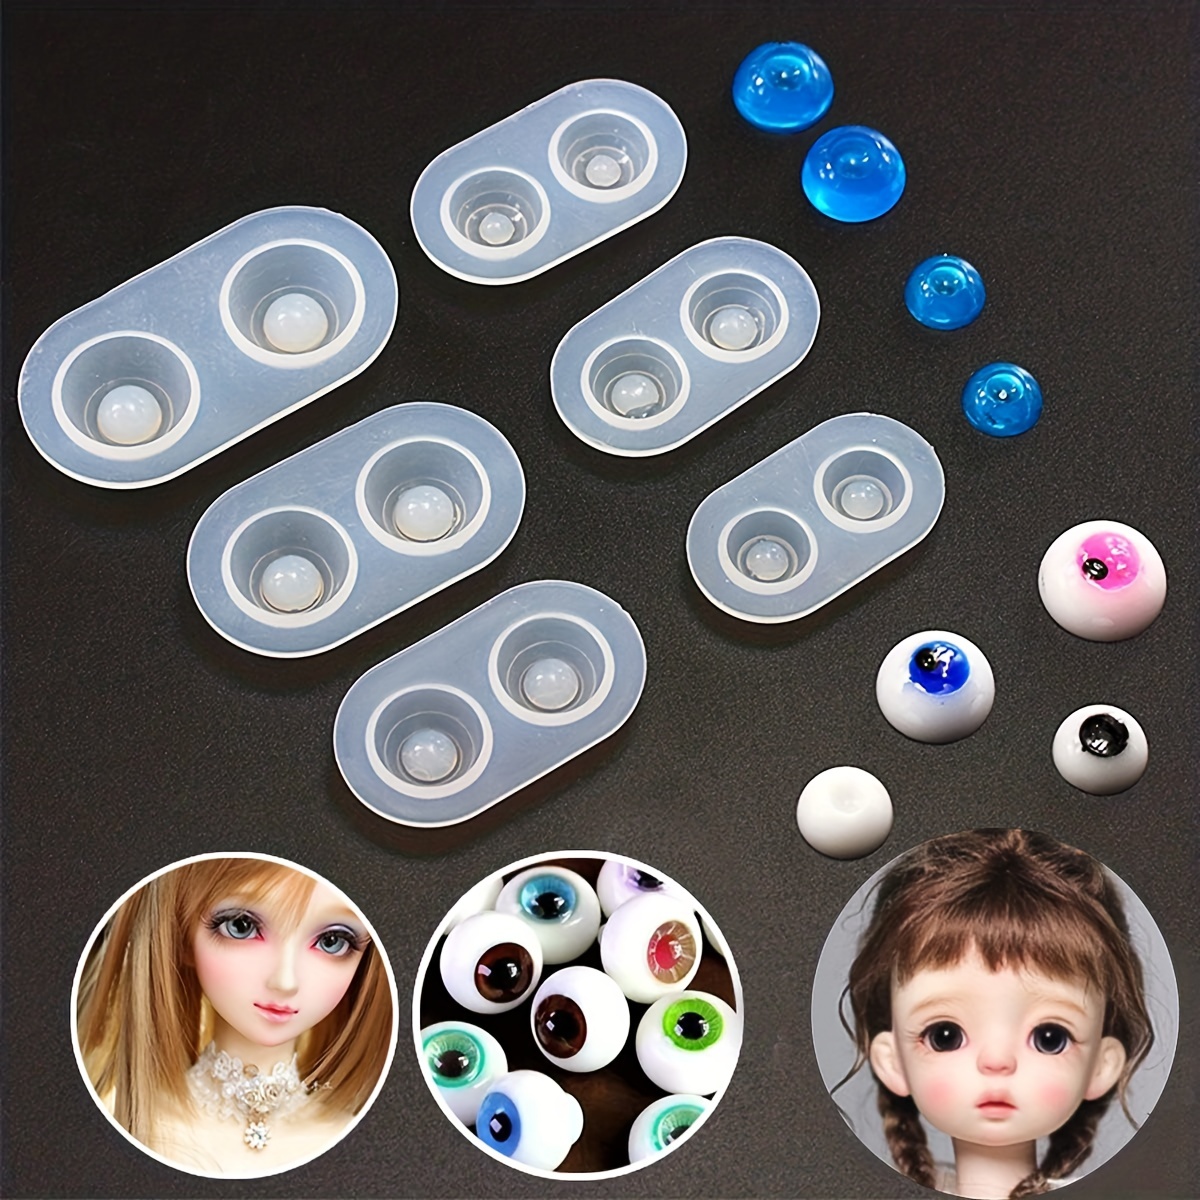 

6pcs Epoxy Resin Doll Eyes Silicone Mold Doll Making Accessories Resin Mold Eyeball Dome Crystal Resin Epoxy Diy Jewelry Casting Mould Handmade Craft Silicone Molds